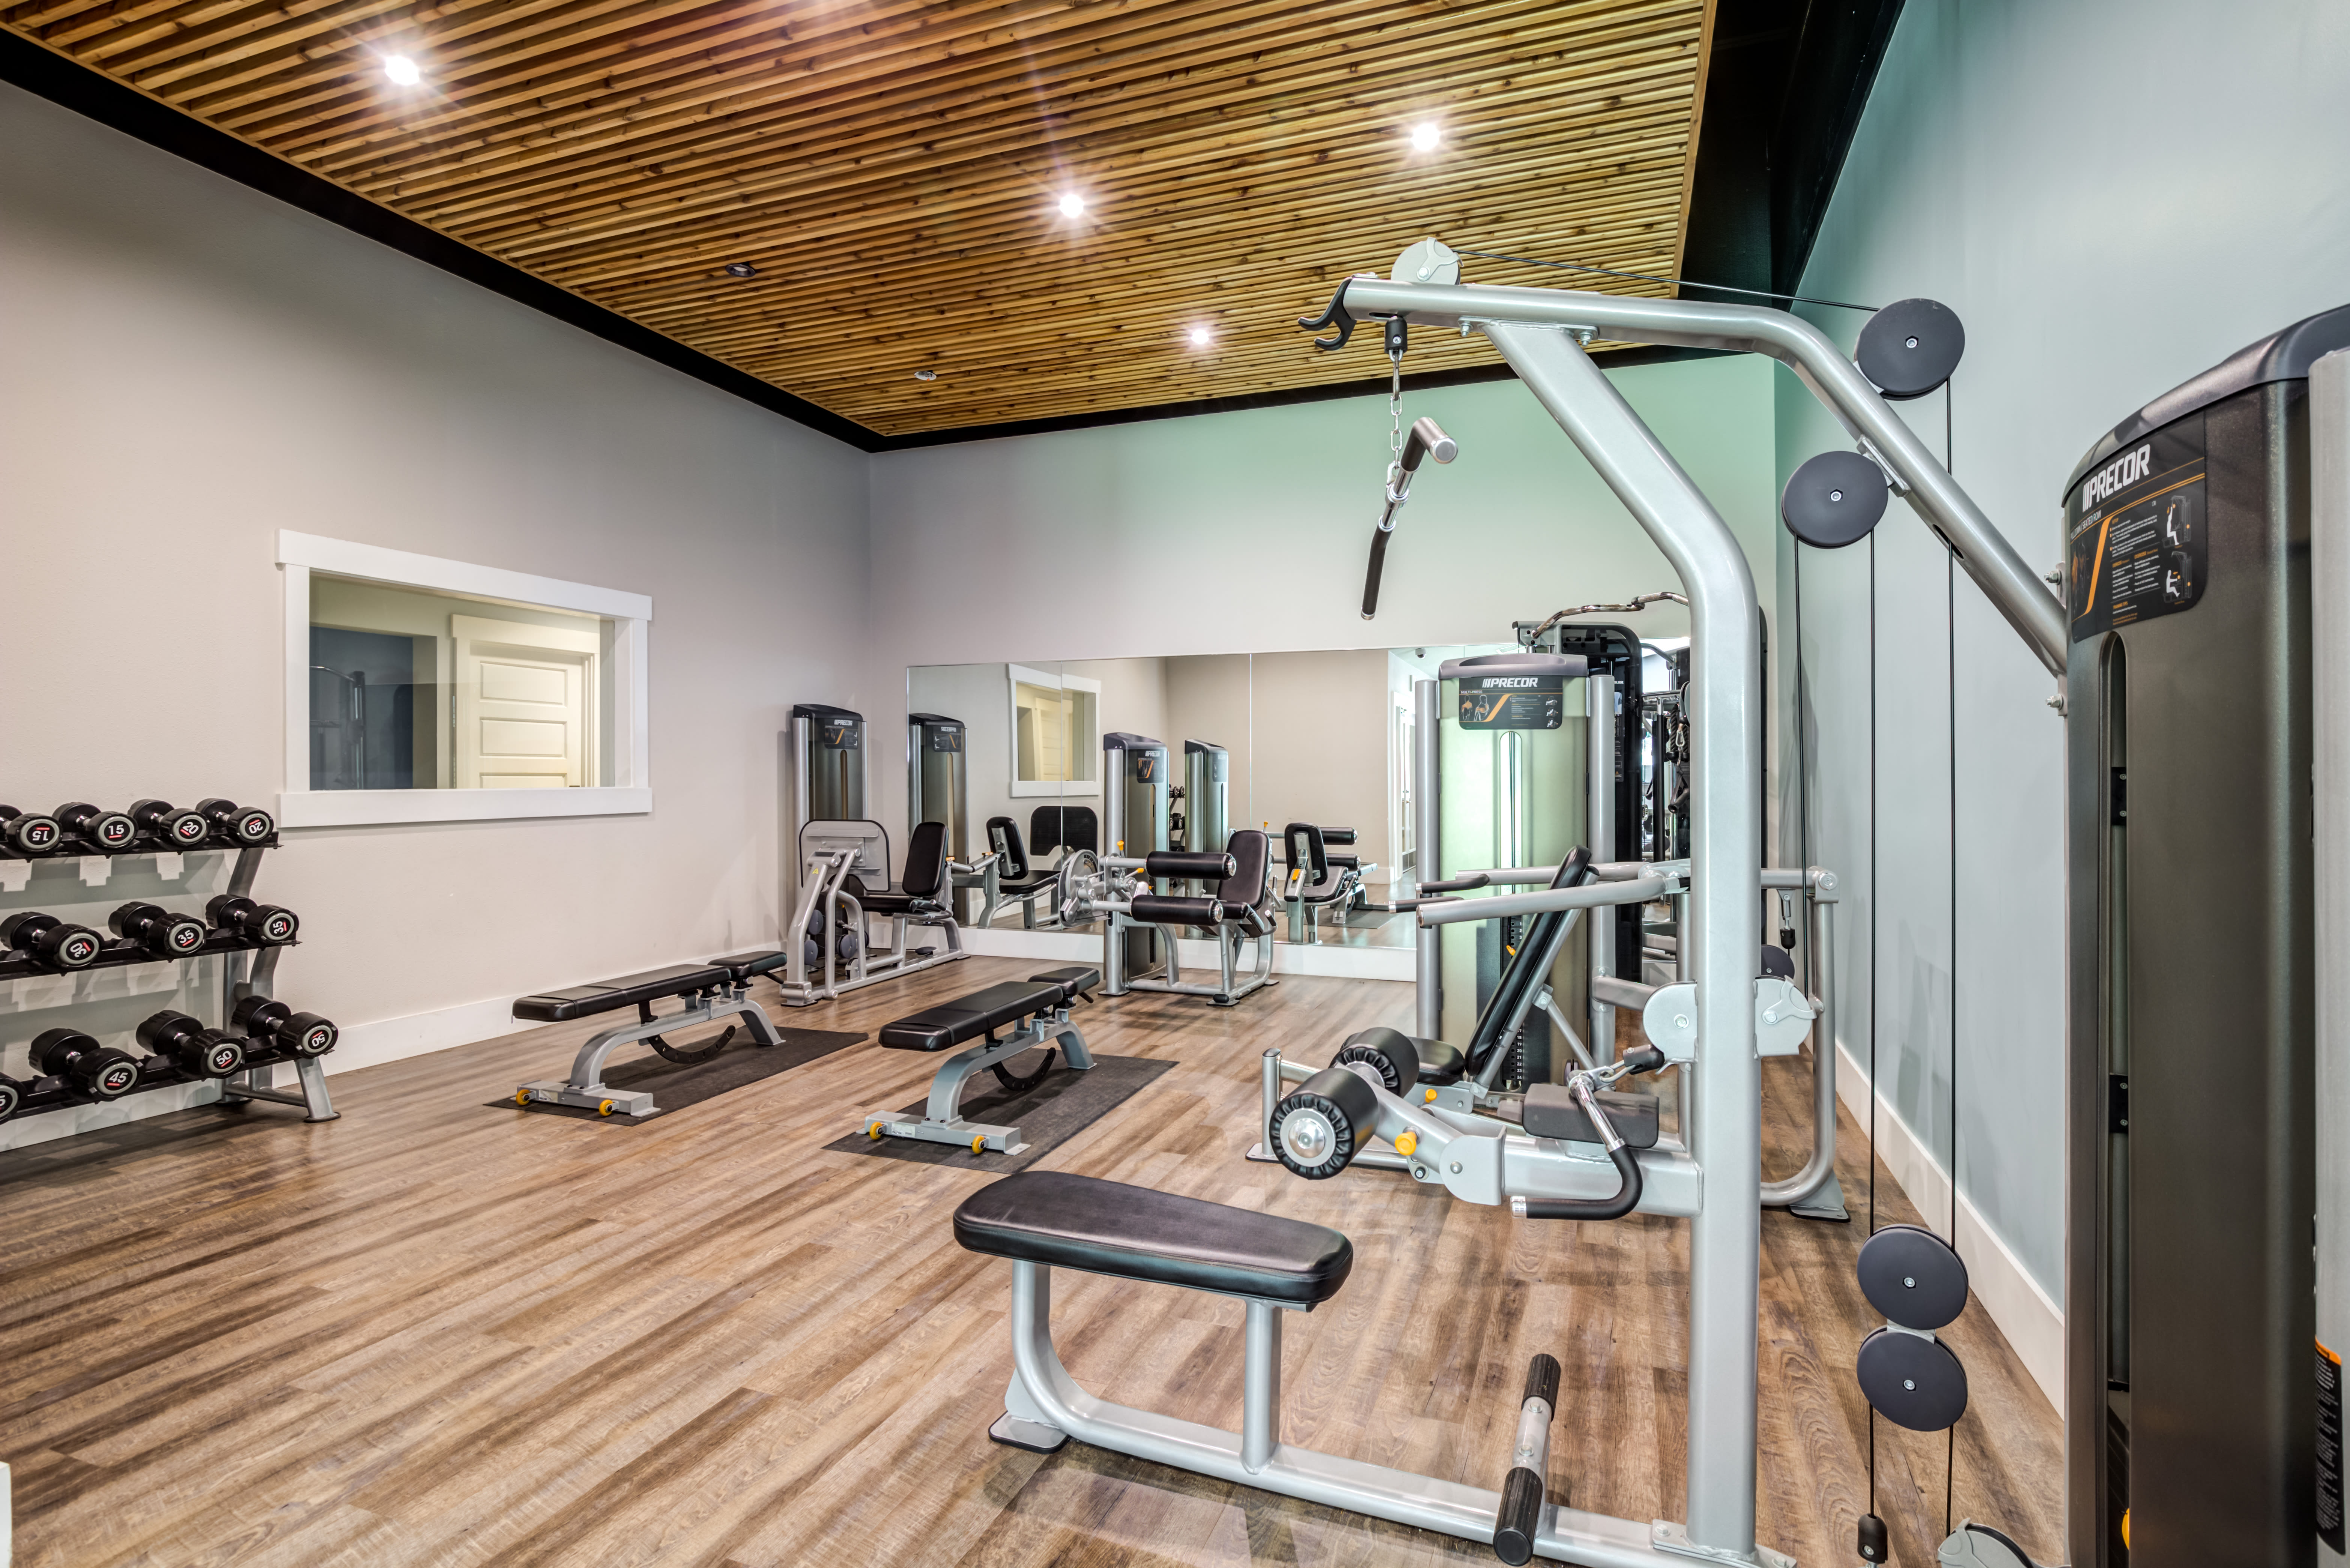 A fully equipped fitness center at The Preserve at Forbes Creek in Kirkland, Washington